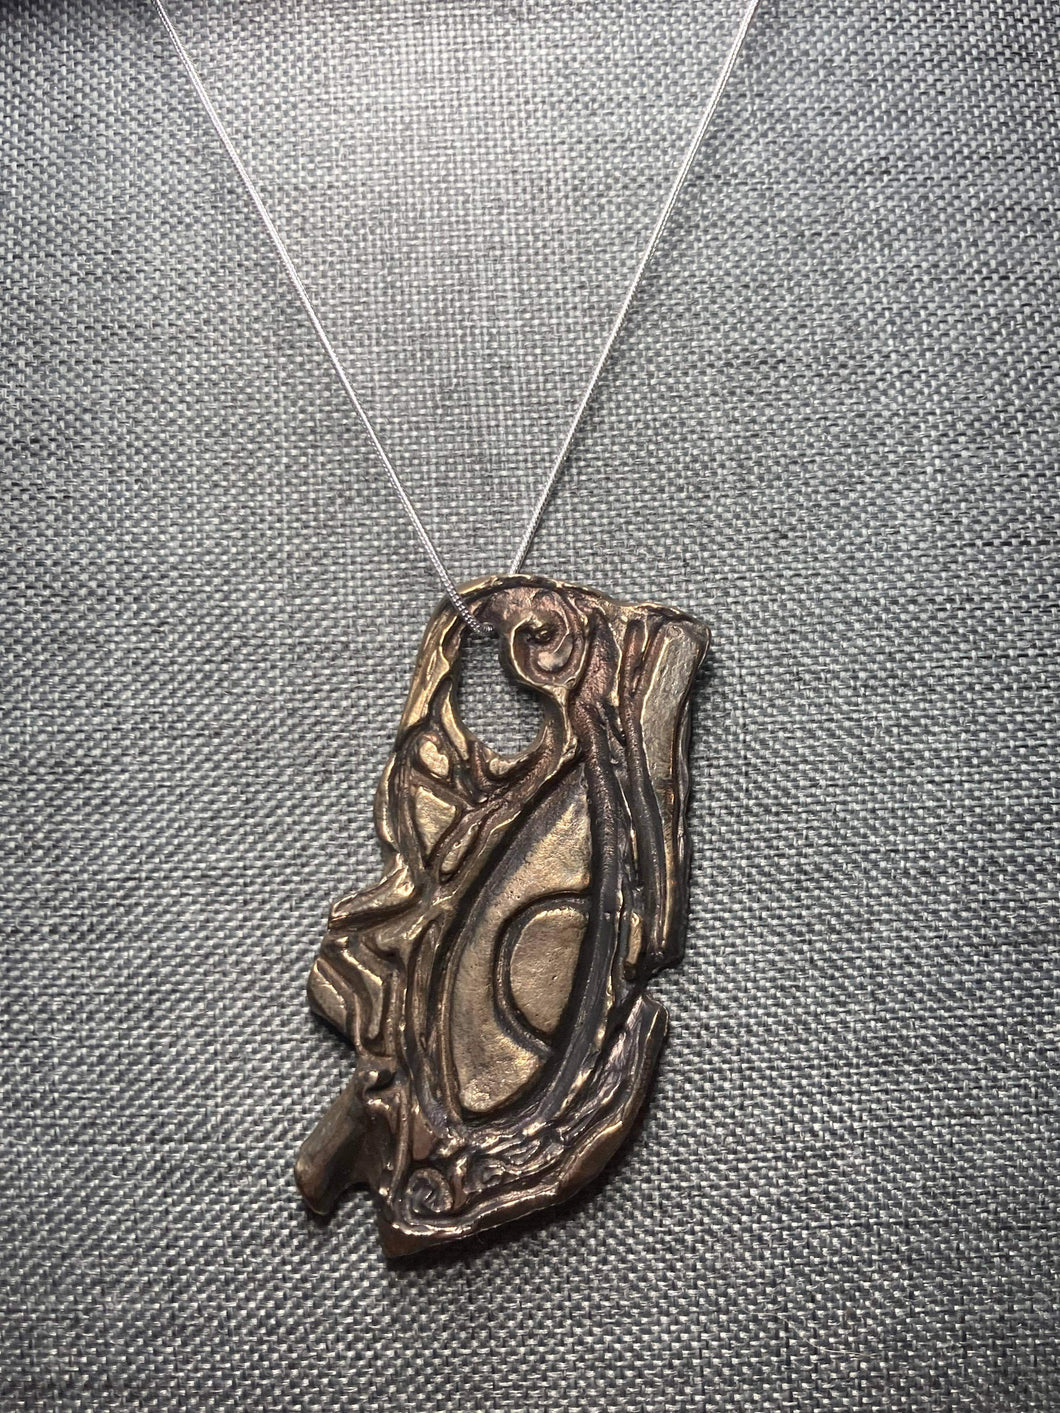 Eye of Horus pendant hand carved and cast in yellow bronze.